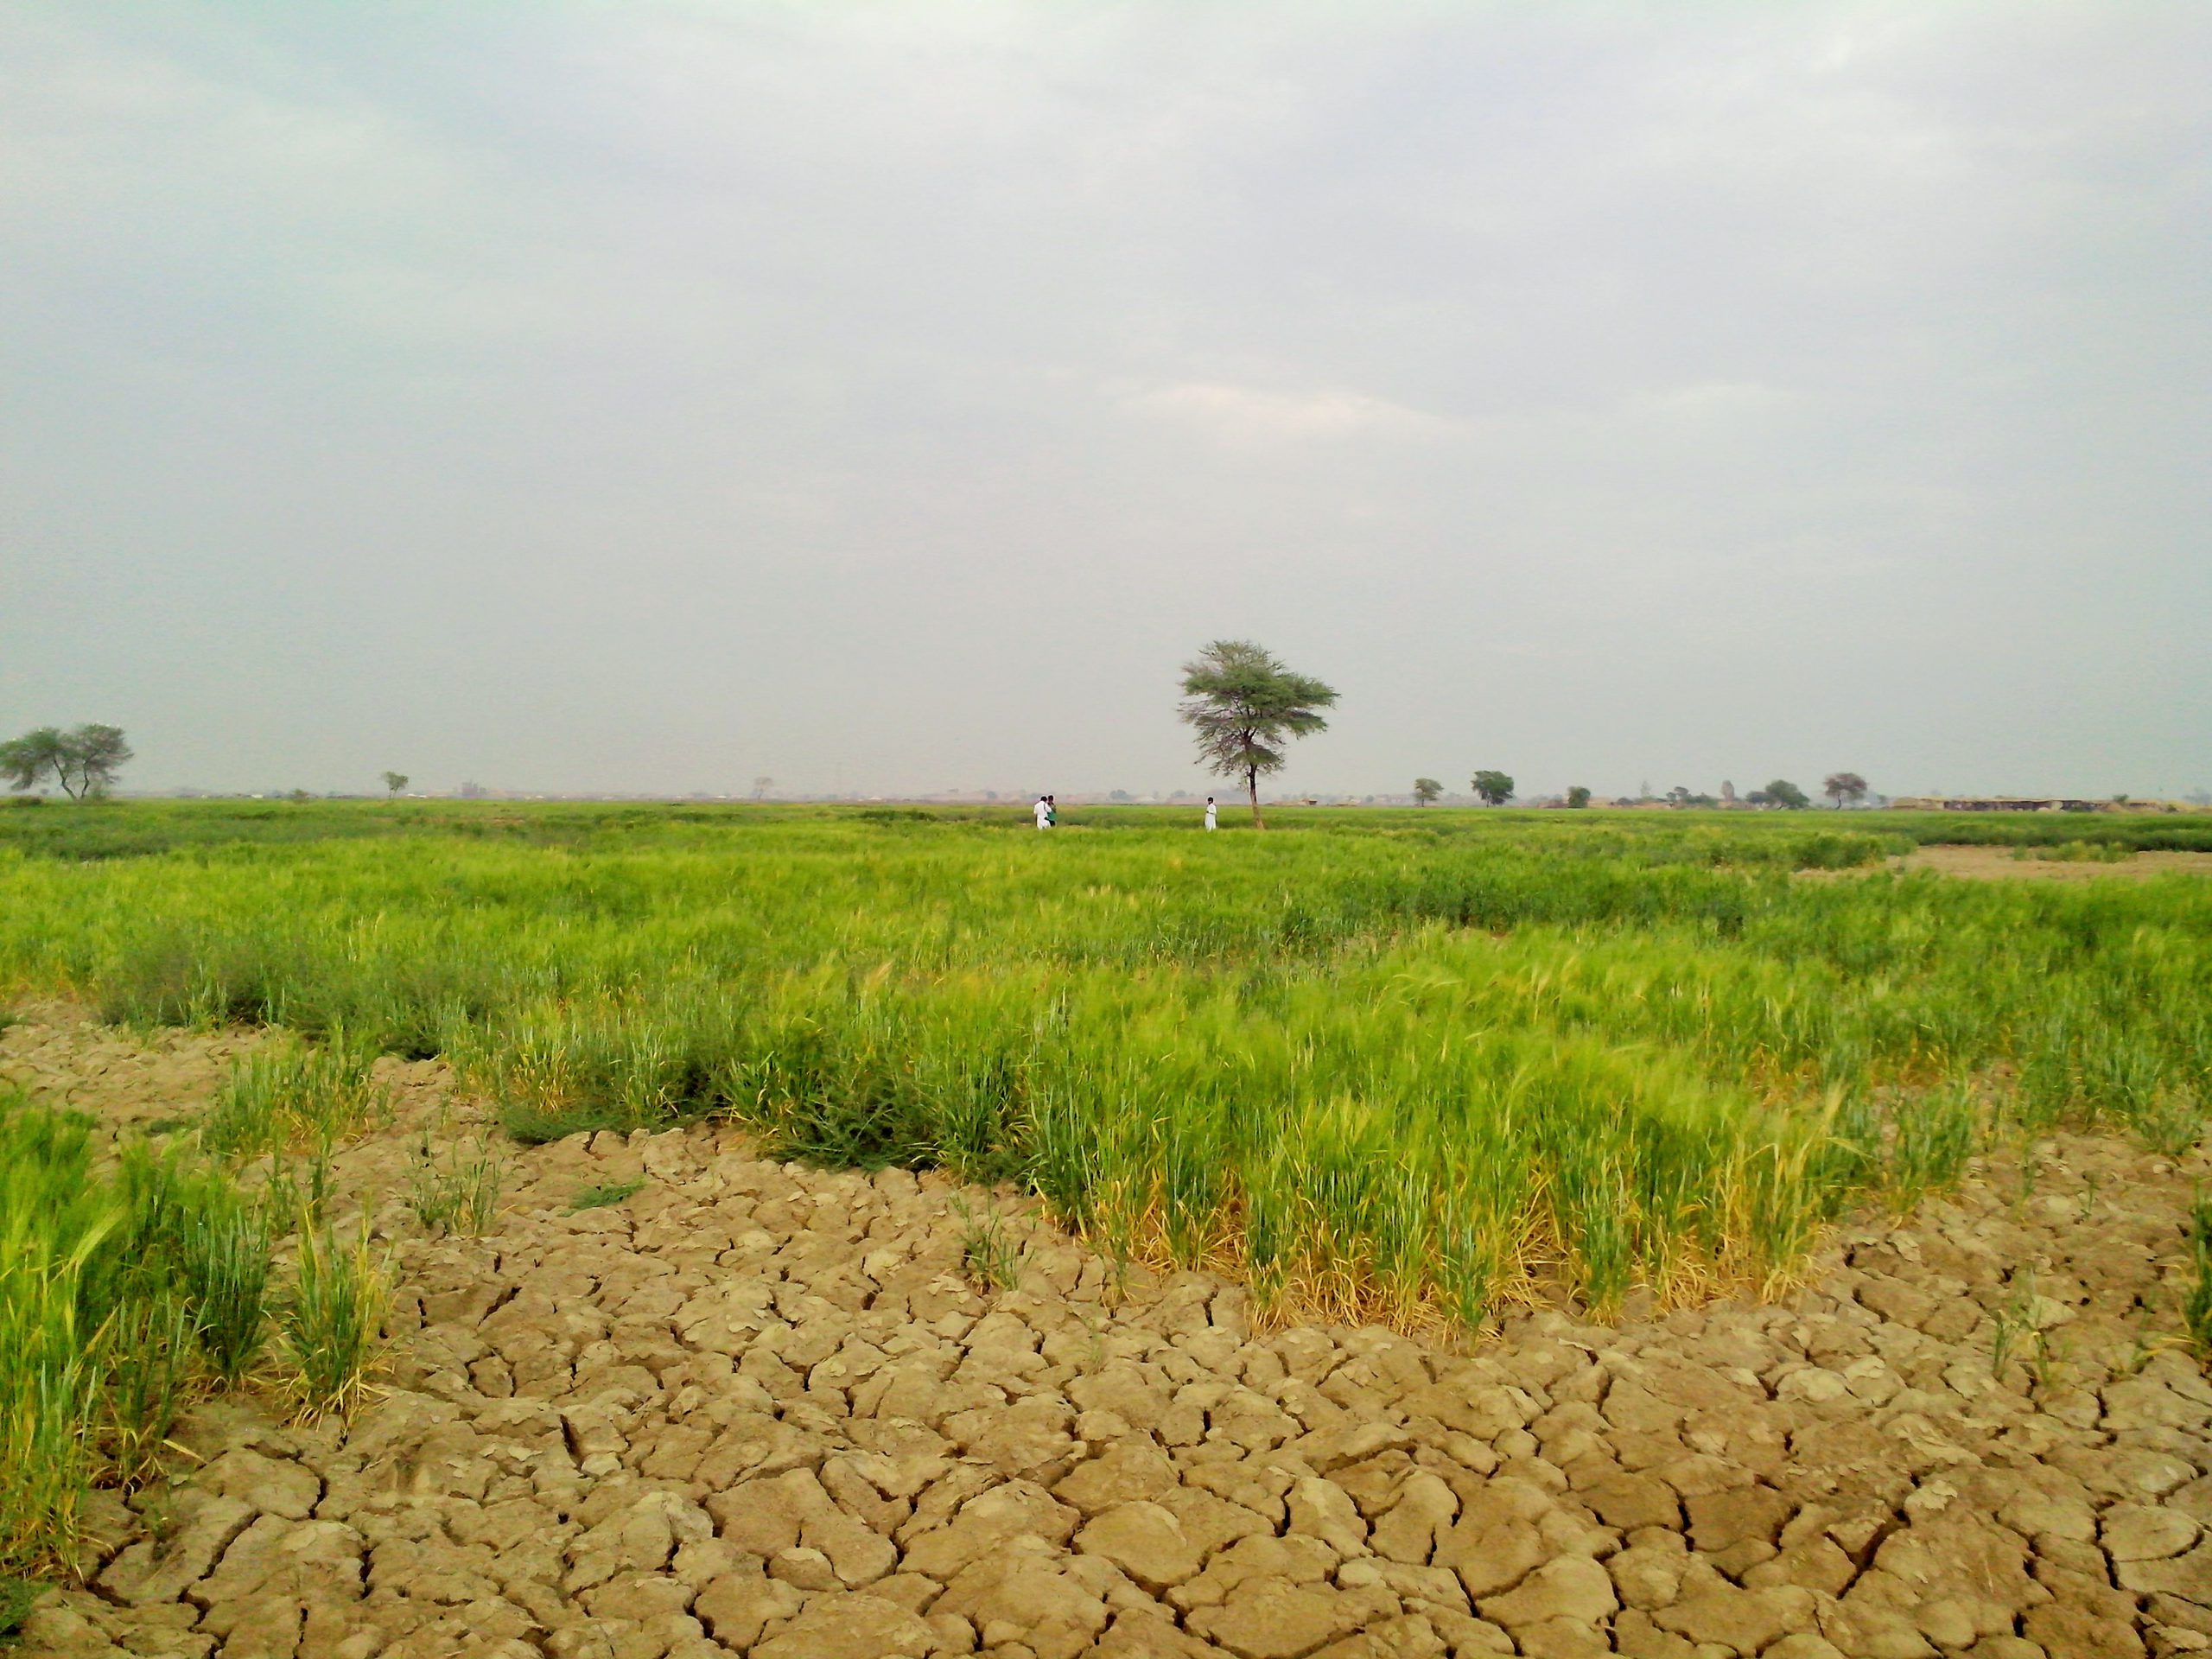 Agricultural challenges: Declining soil fertility threatens crop production